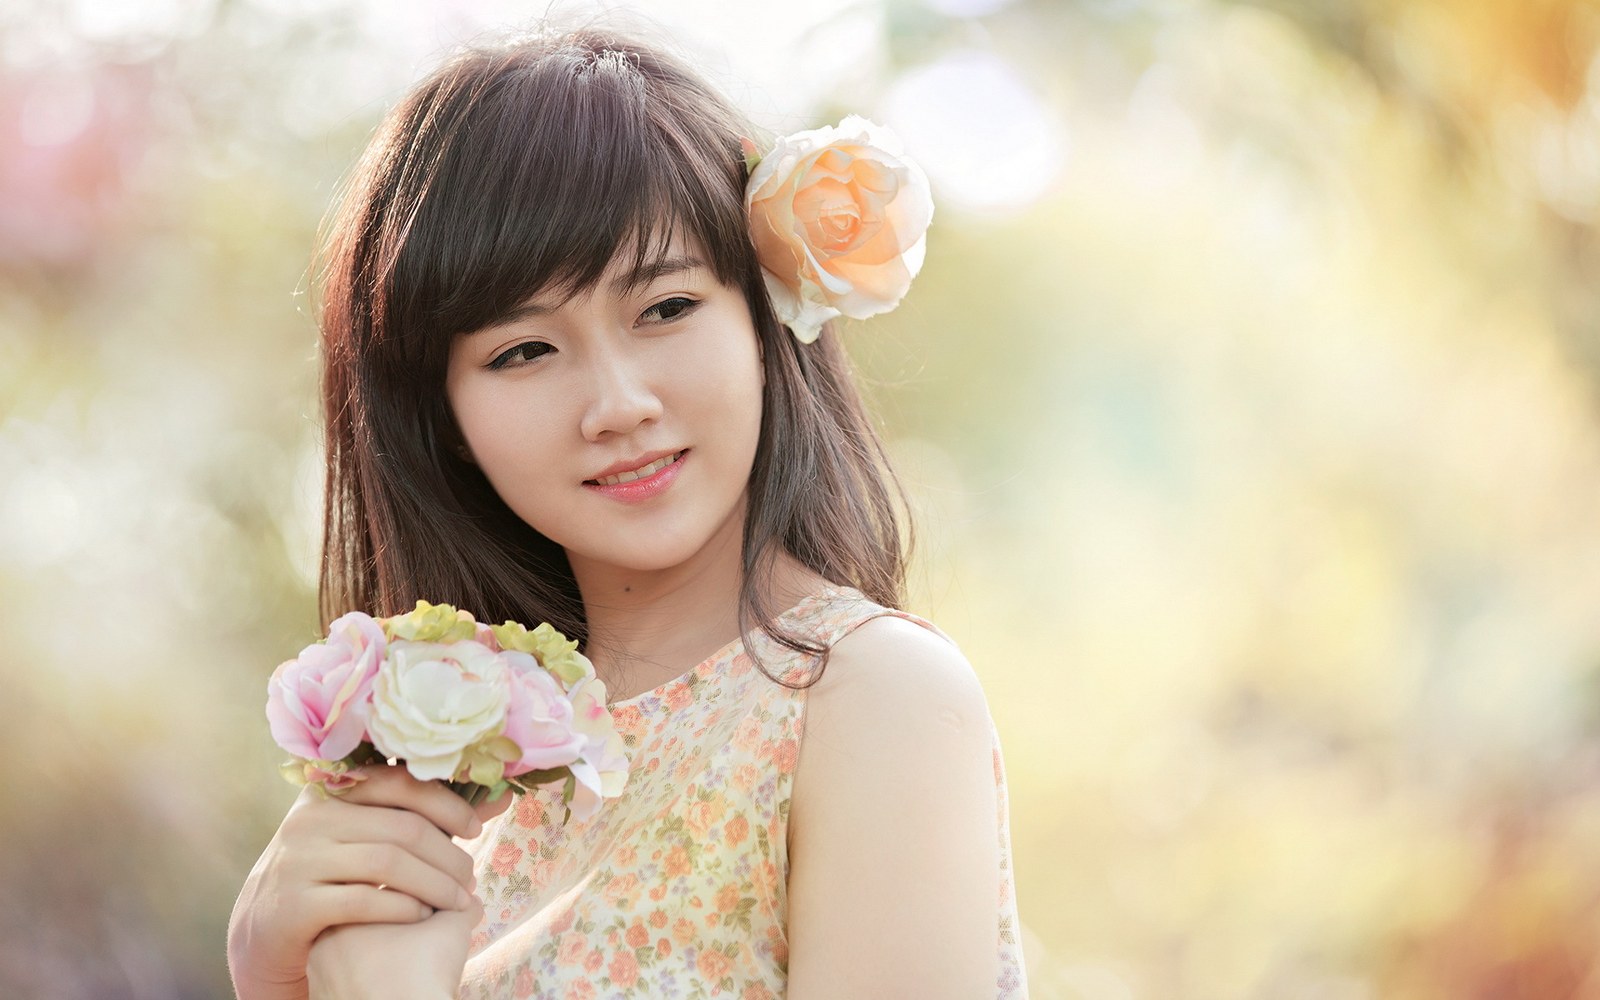 Korean Beautiful Girls With Flowers Wallpapers Hd - Beautiful Korean Girl Wallpaper Hd , HD Wallpaper & Backgrounds